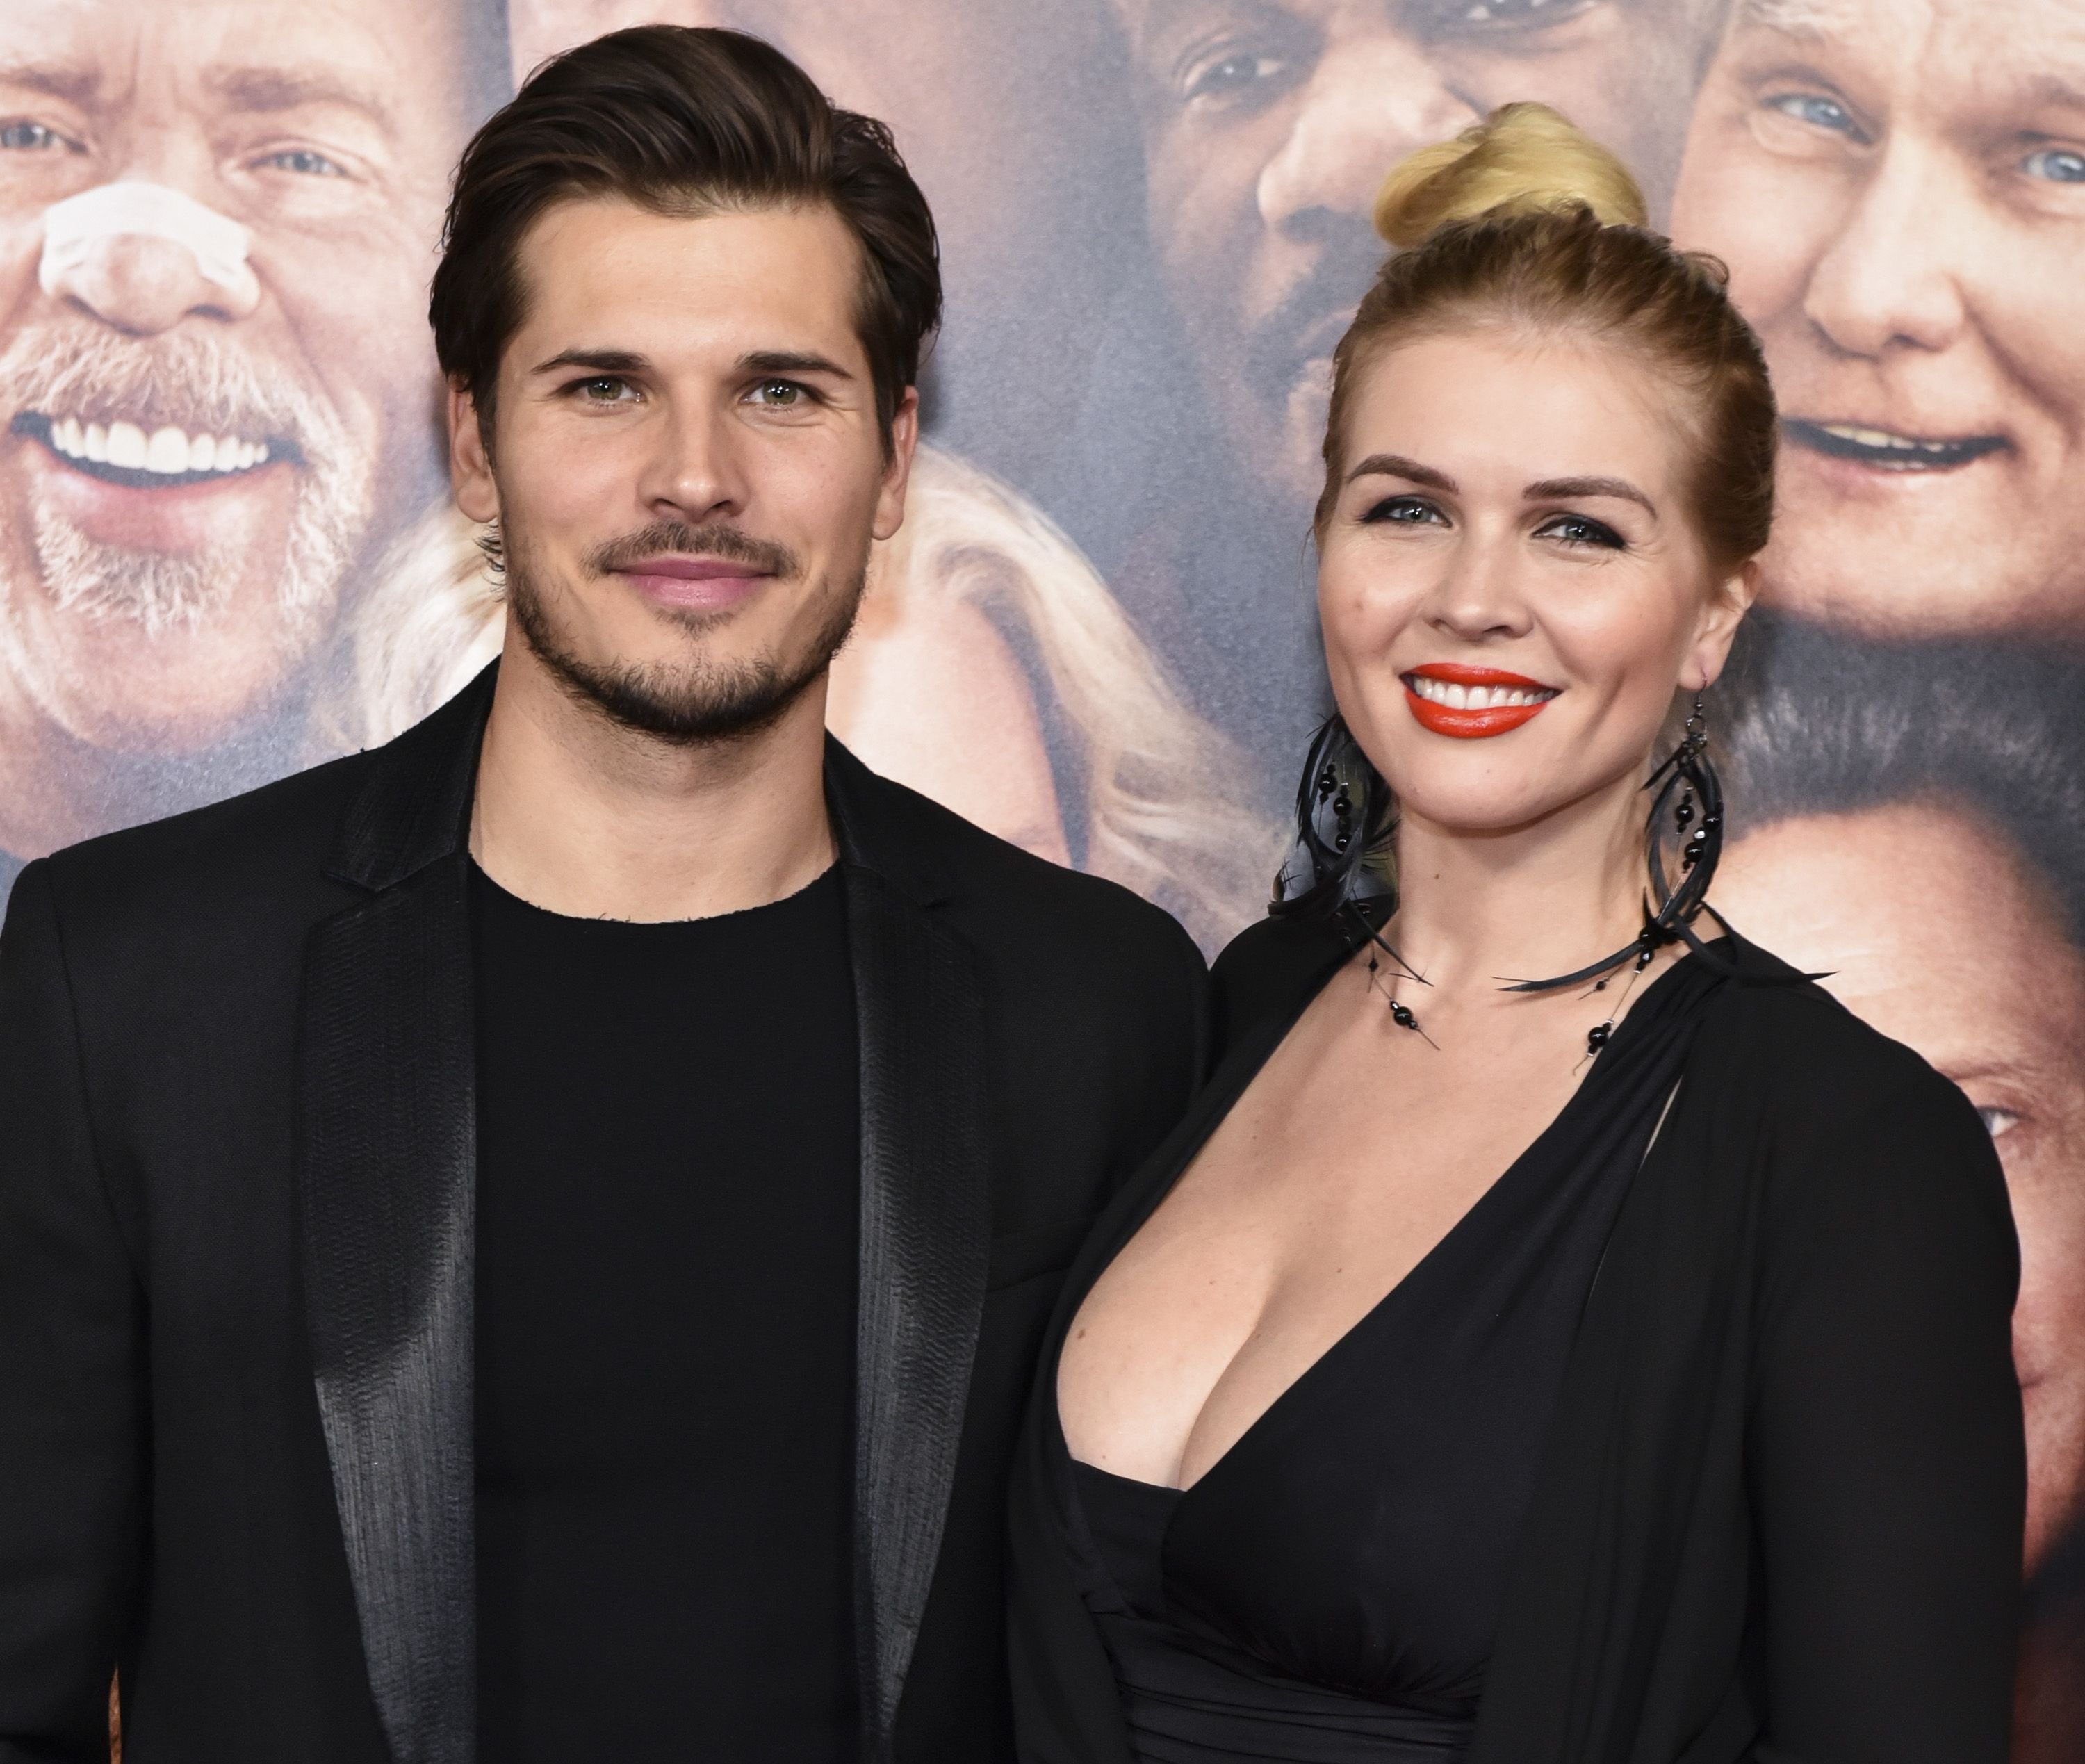 Gleb Savchenko and Elena Samodanova at the premiere of "Father Figures" at TCL Chinese Theatre on December 13, 2017 | Photo: Getty Images